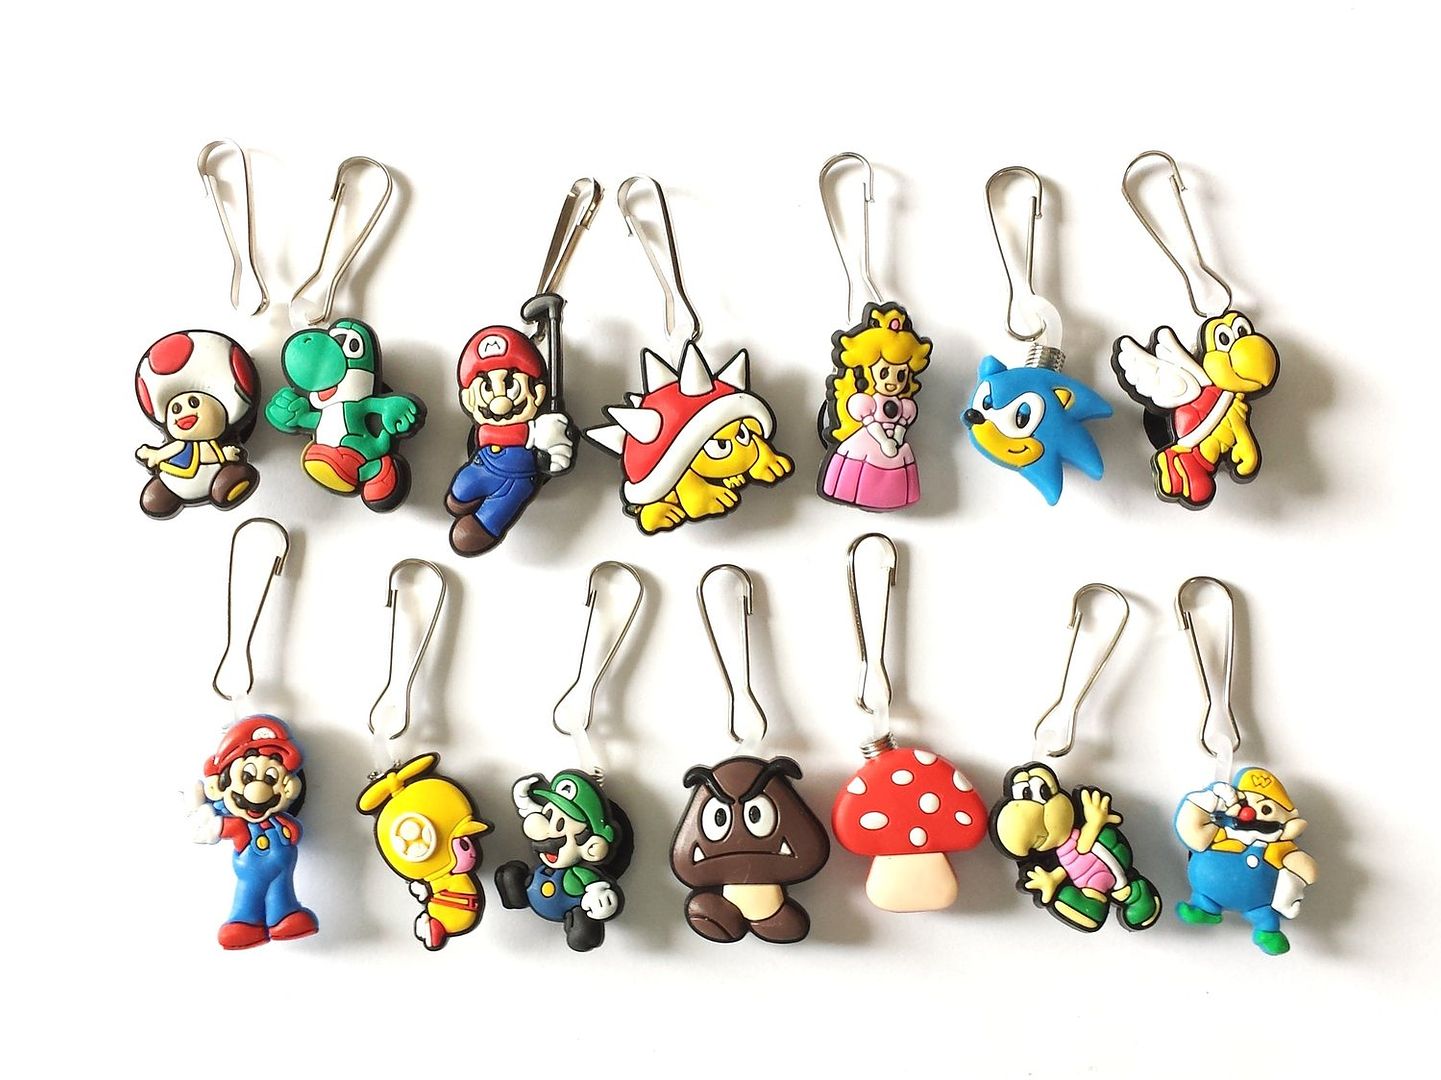  Super Mario World zipper pulls are fun for kids going back to school